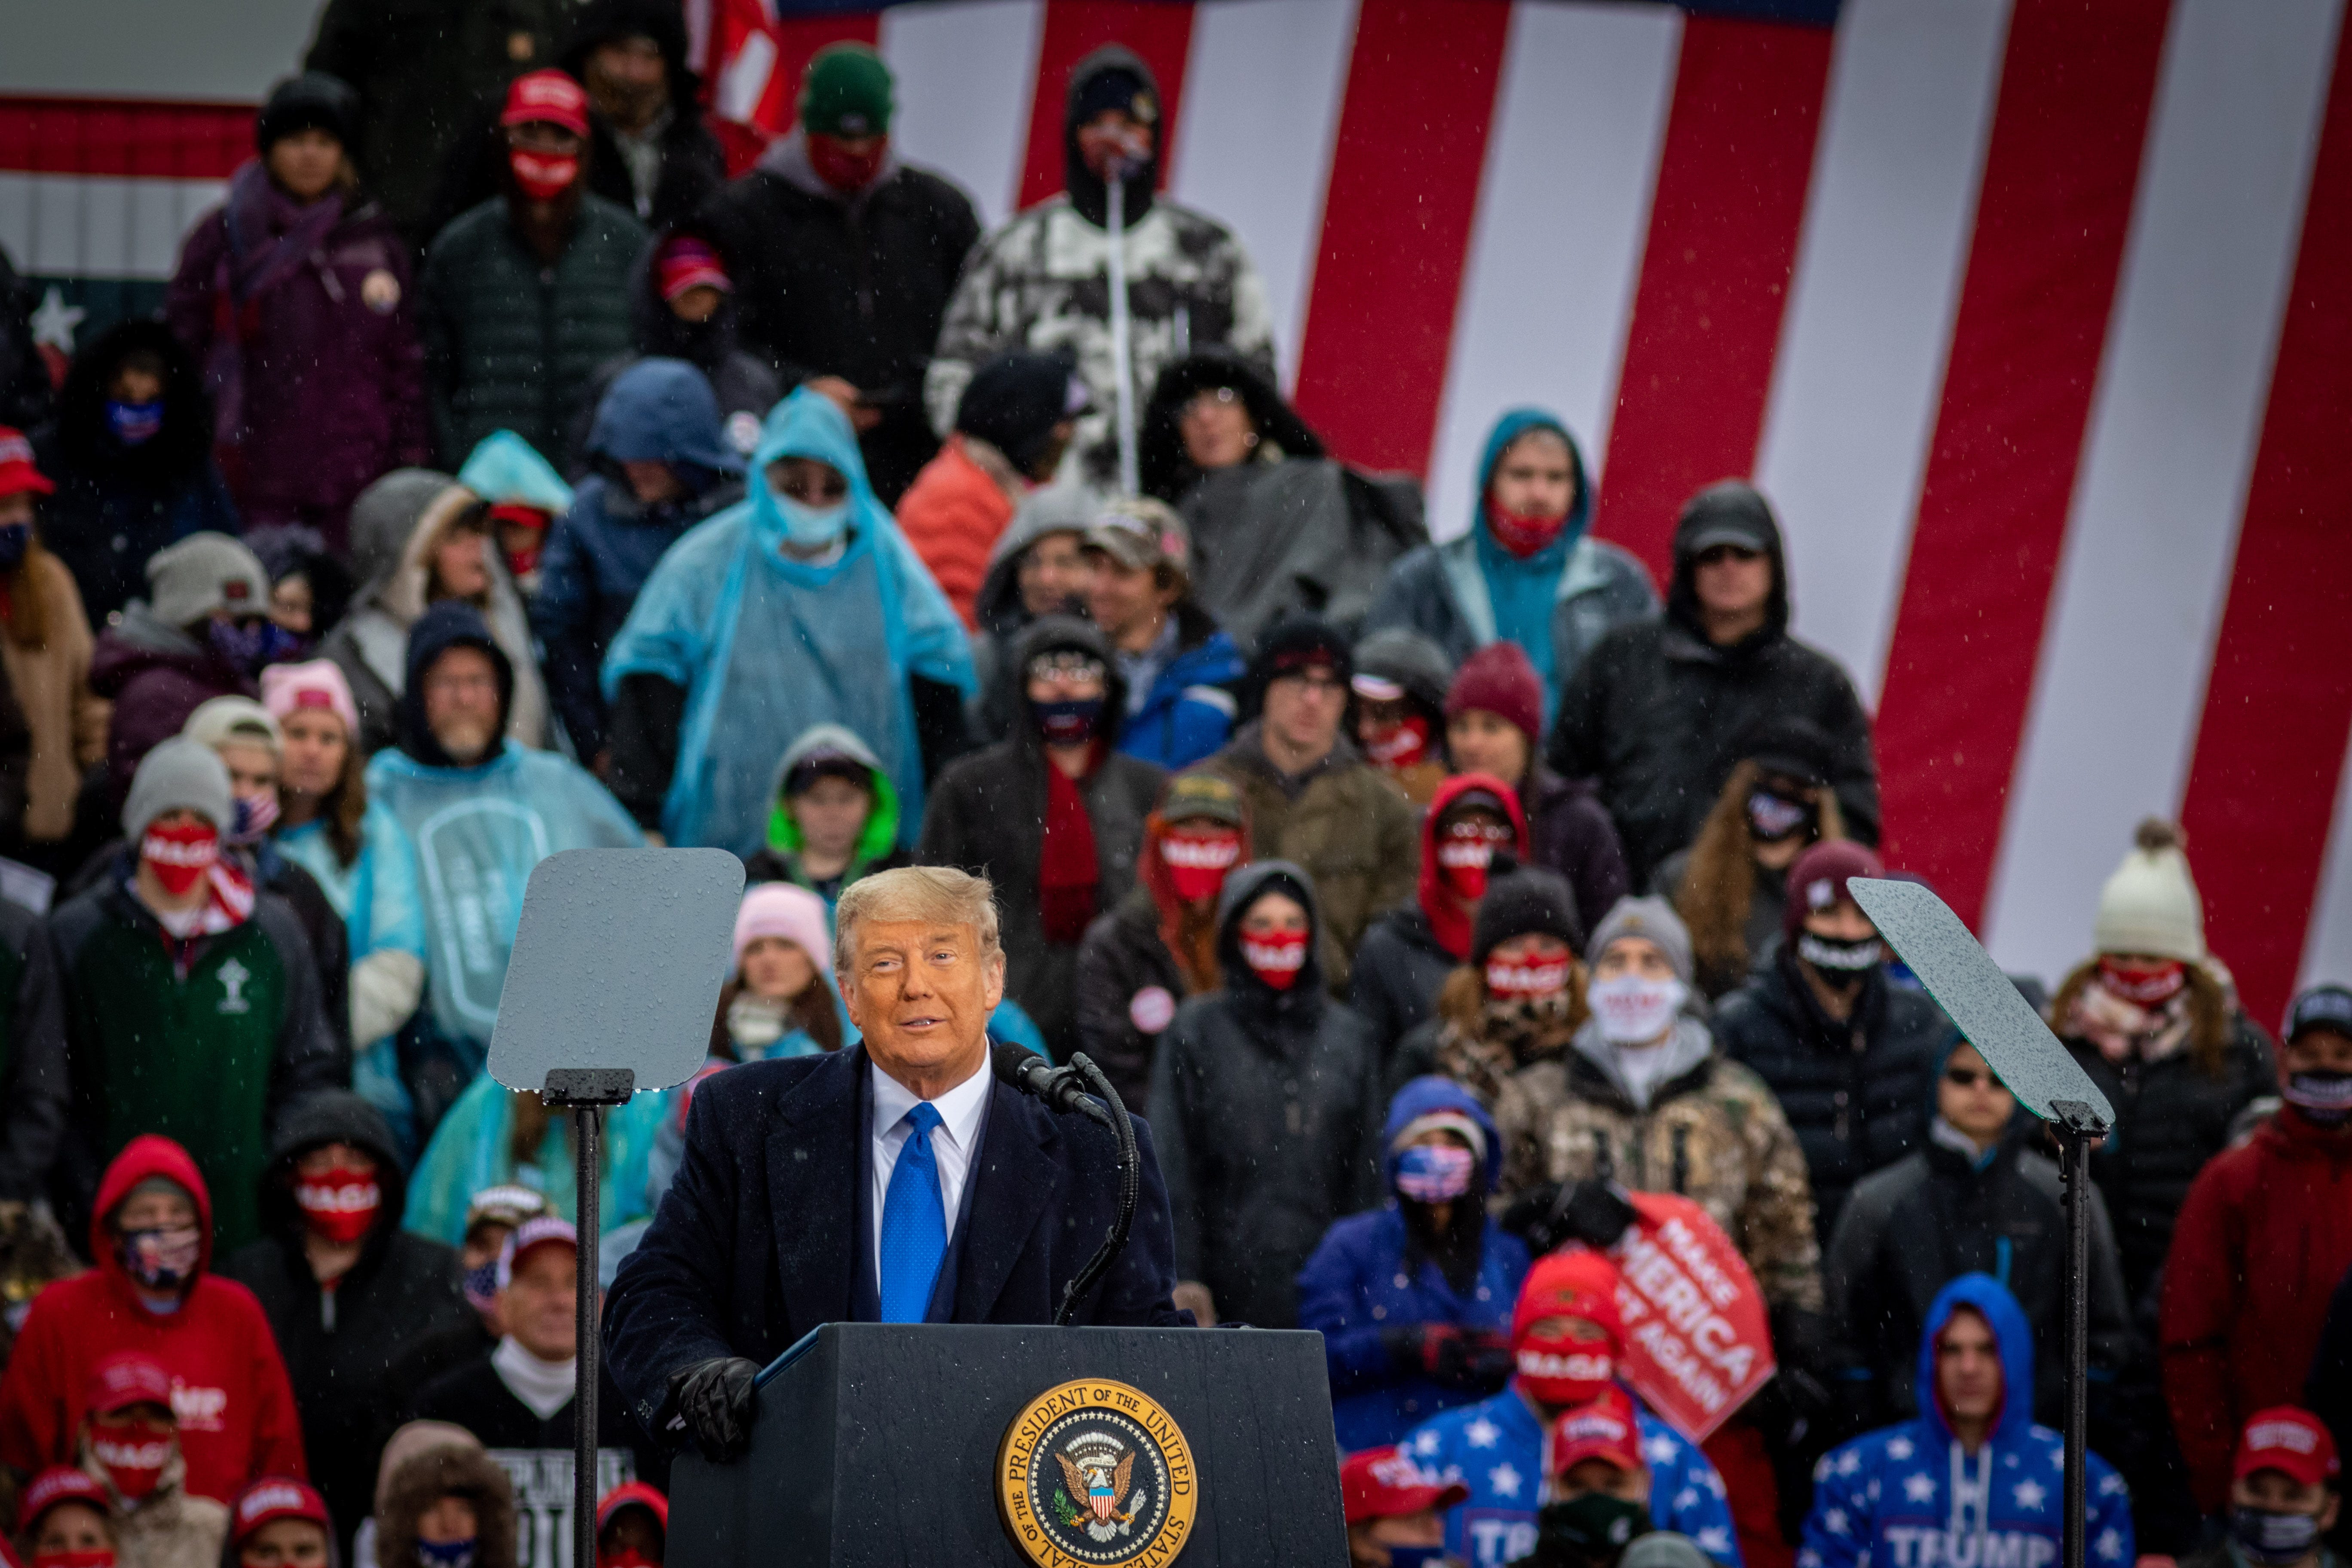 President Donald Trump addresses the crowd during a campaign rally in Lansing, Michigan on October 27, 2020, one week before the general election.